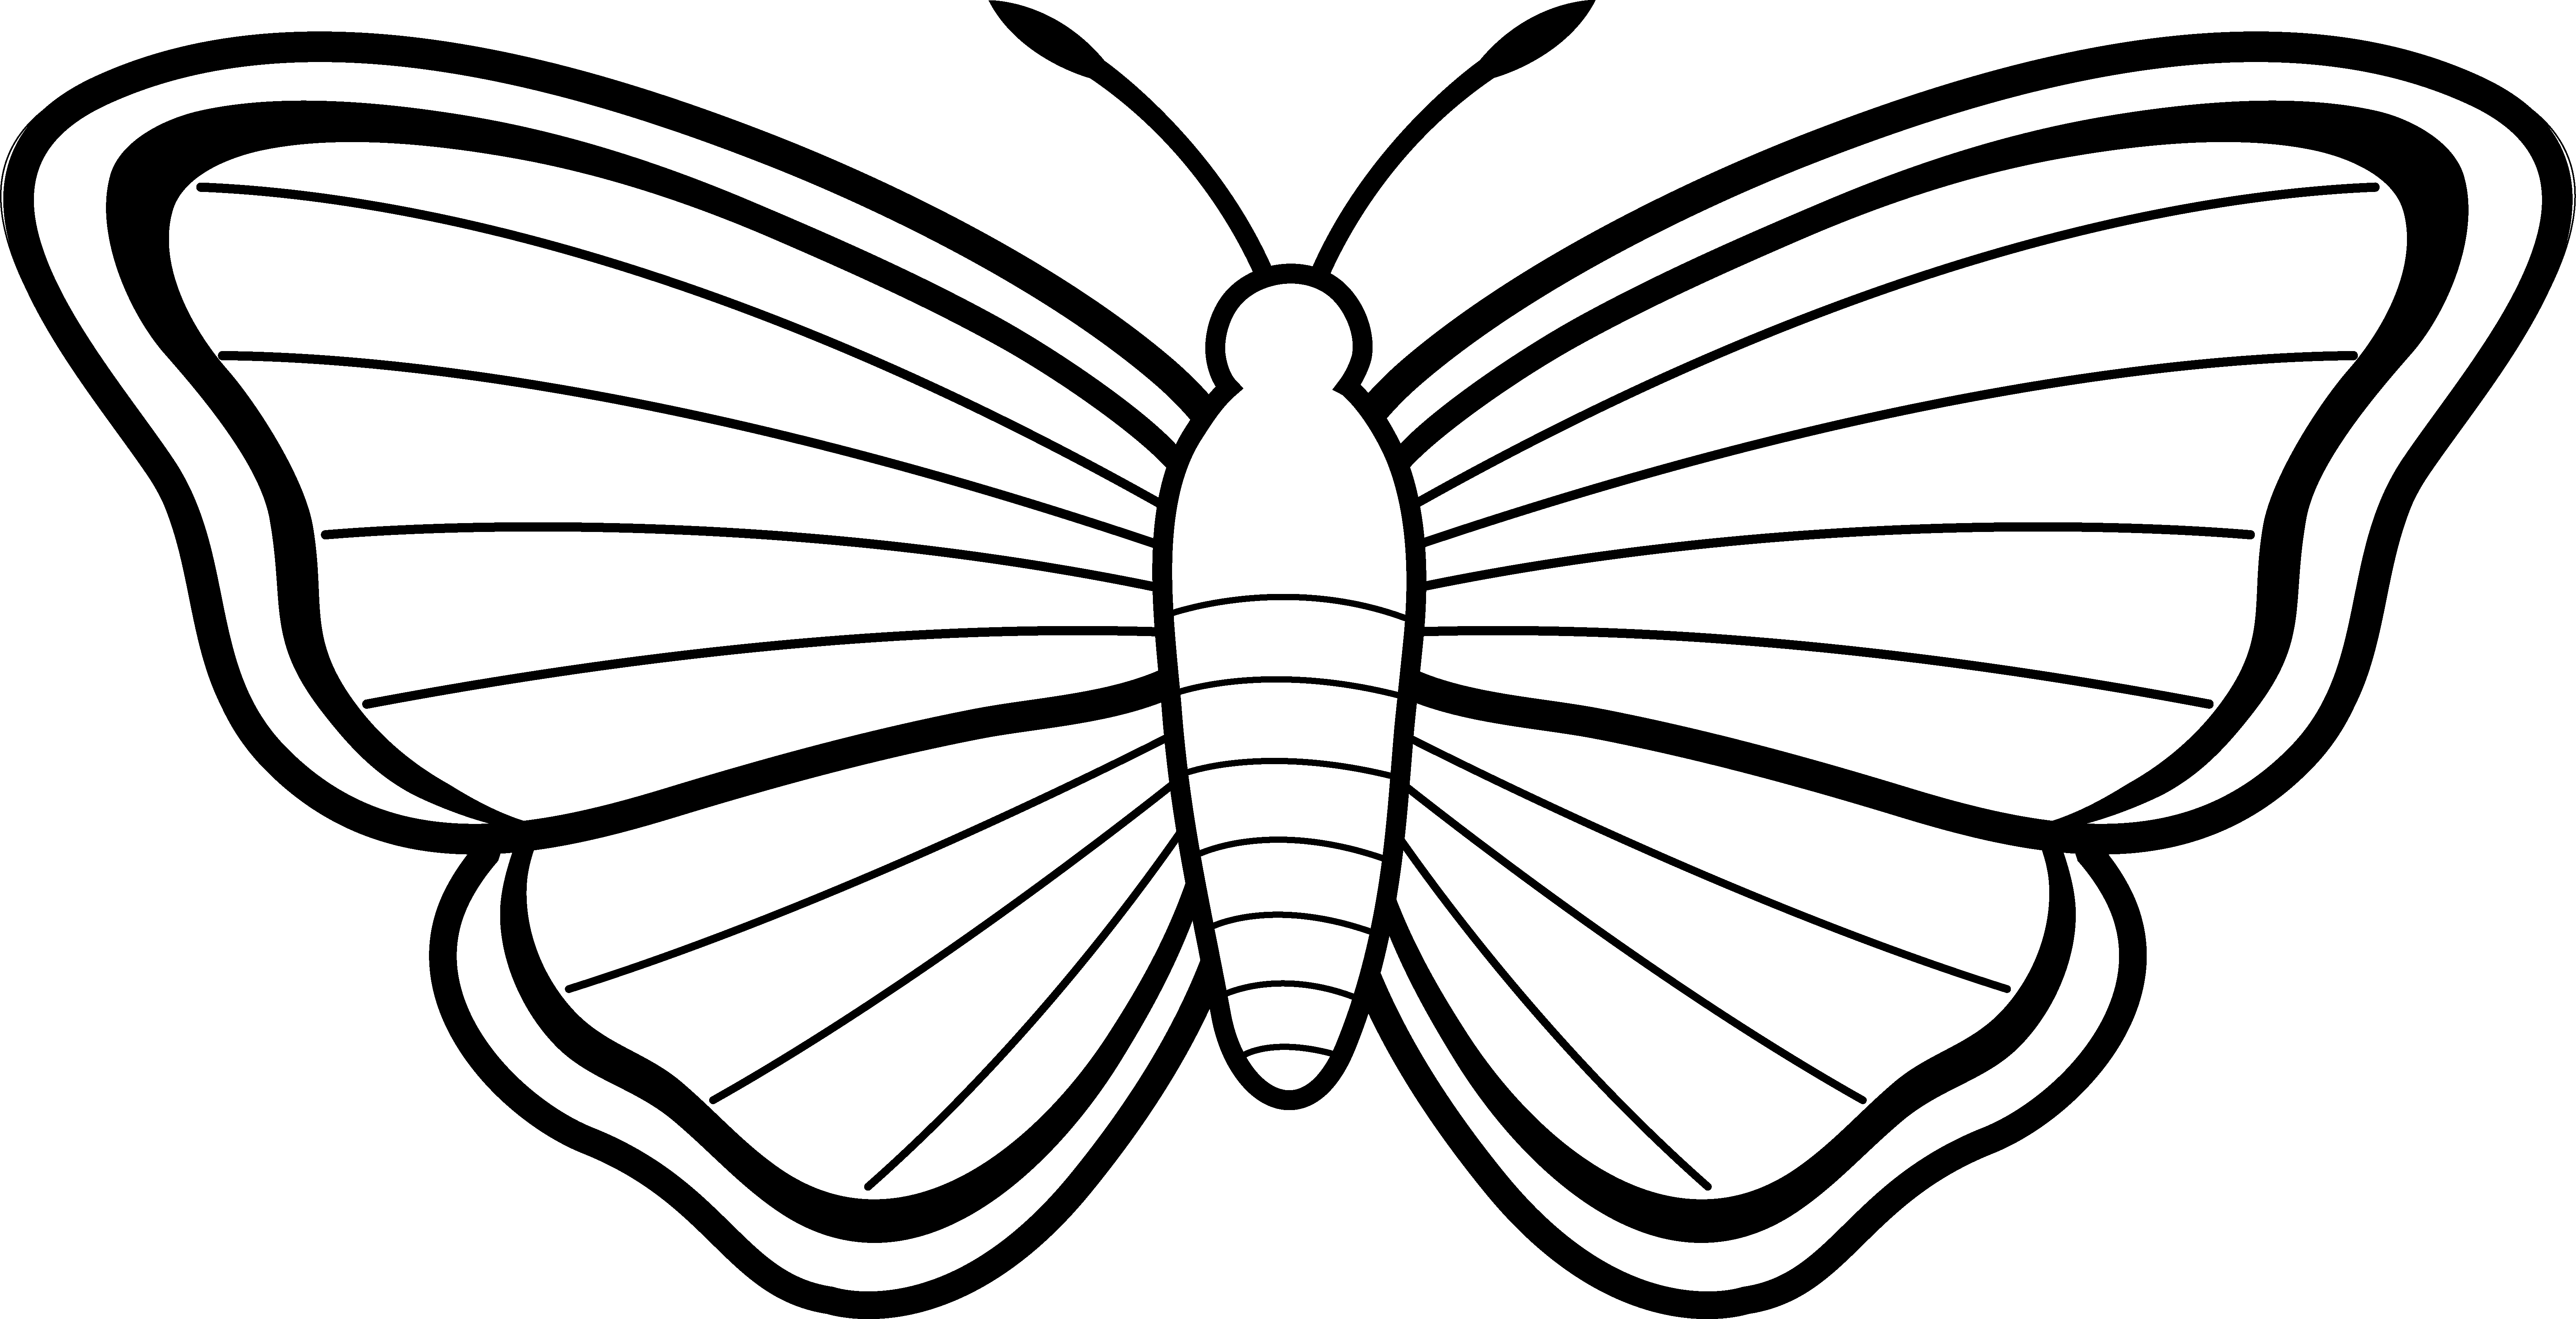 Black and white clipart butterfly - ClipartFox